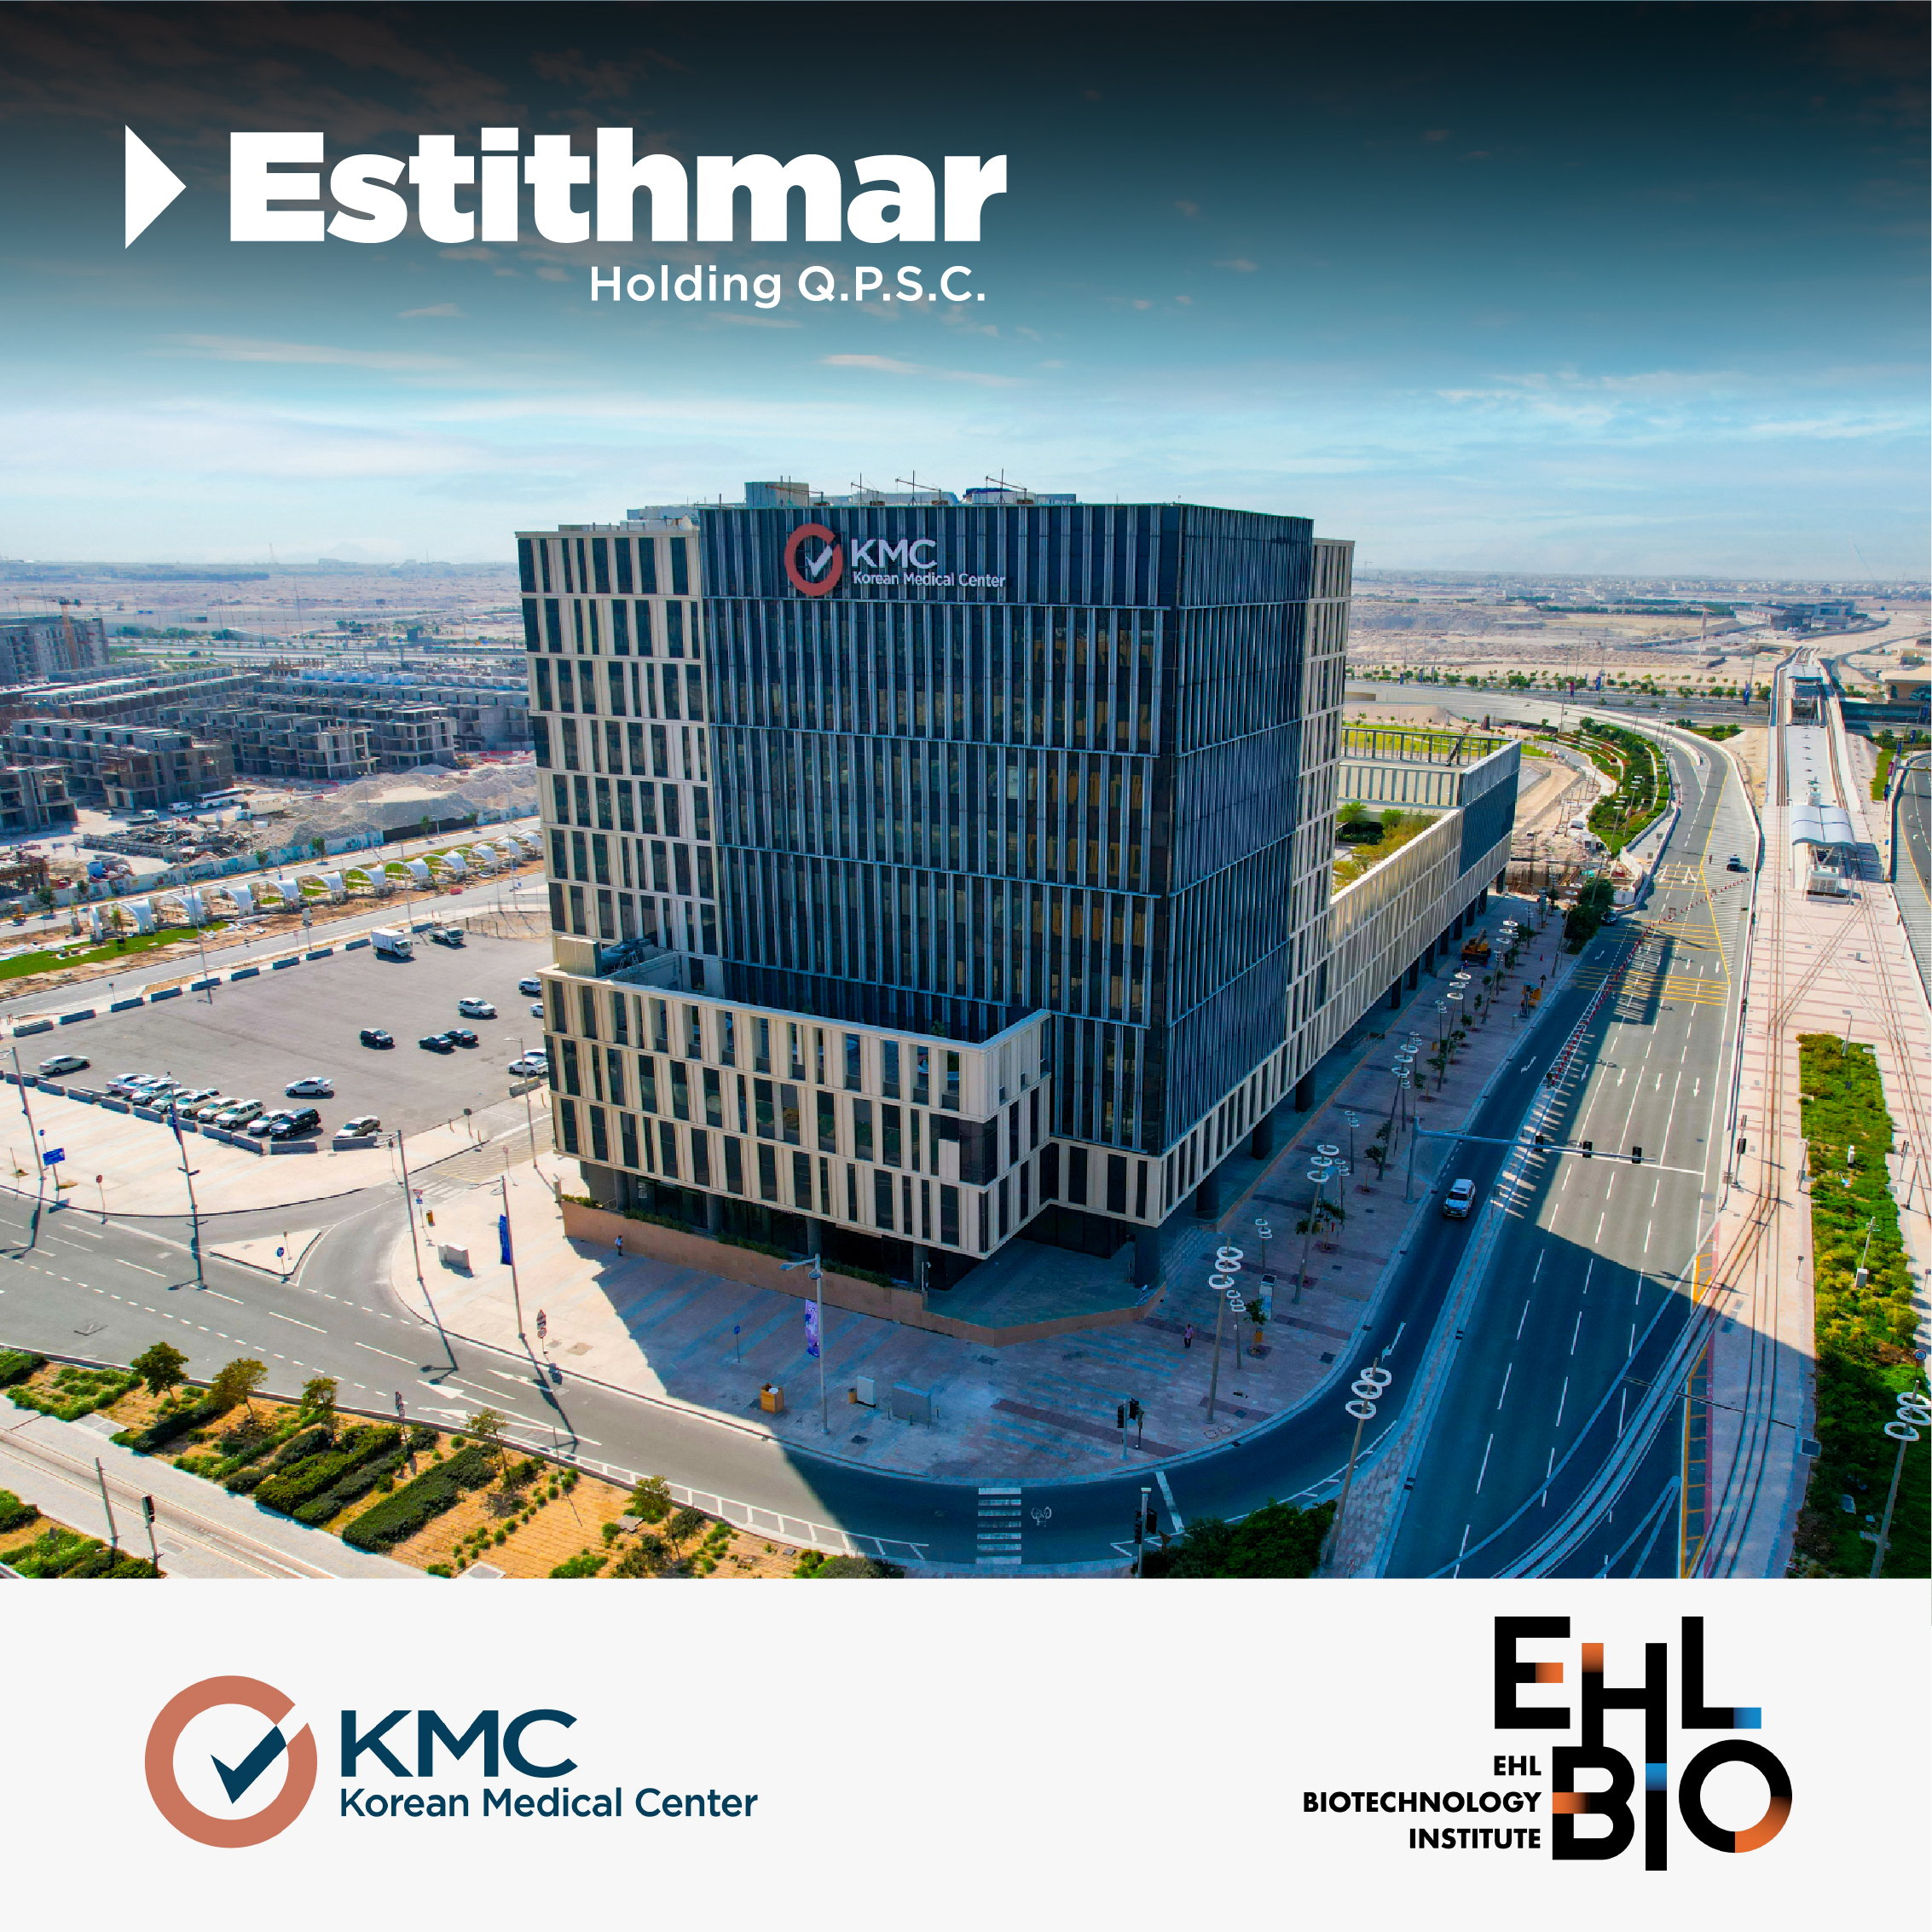 Estithmar Holding brings the world’s leading stem cell therapy institute to the Korean Medical Center (KMC) in Lusail